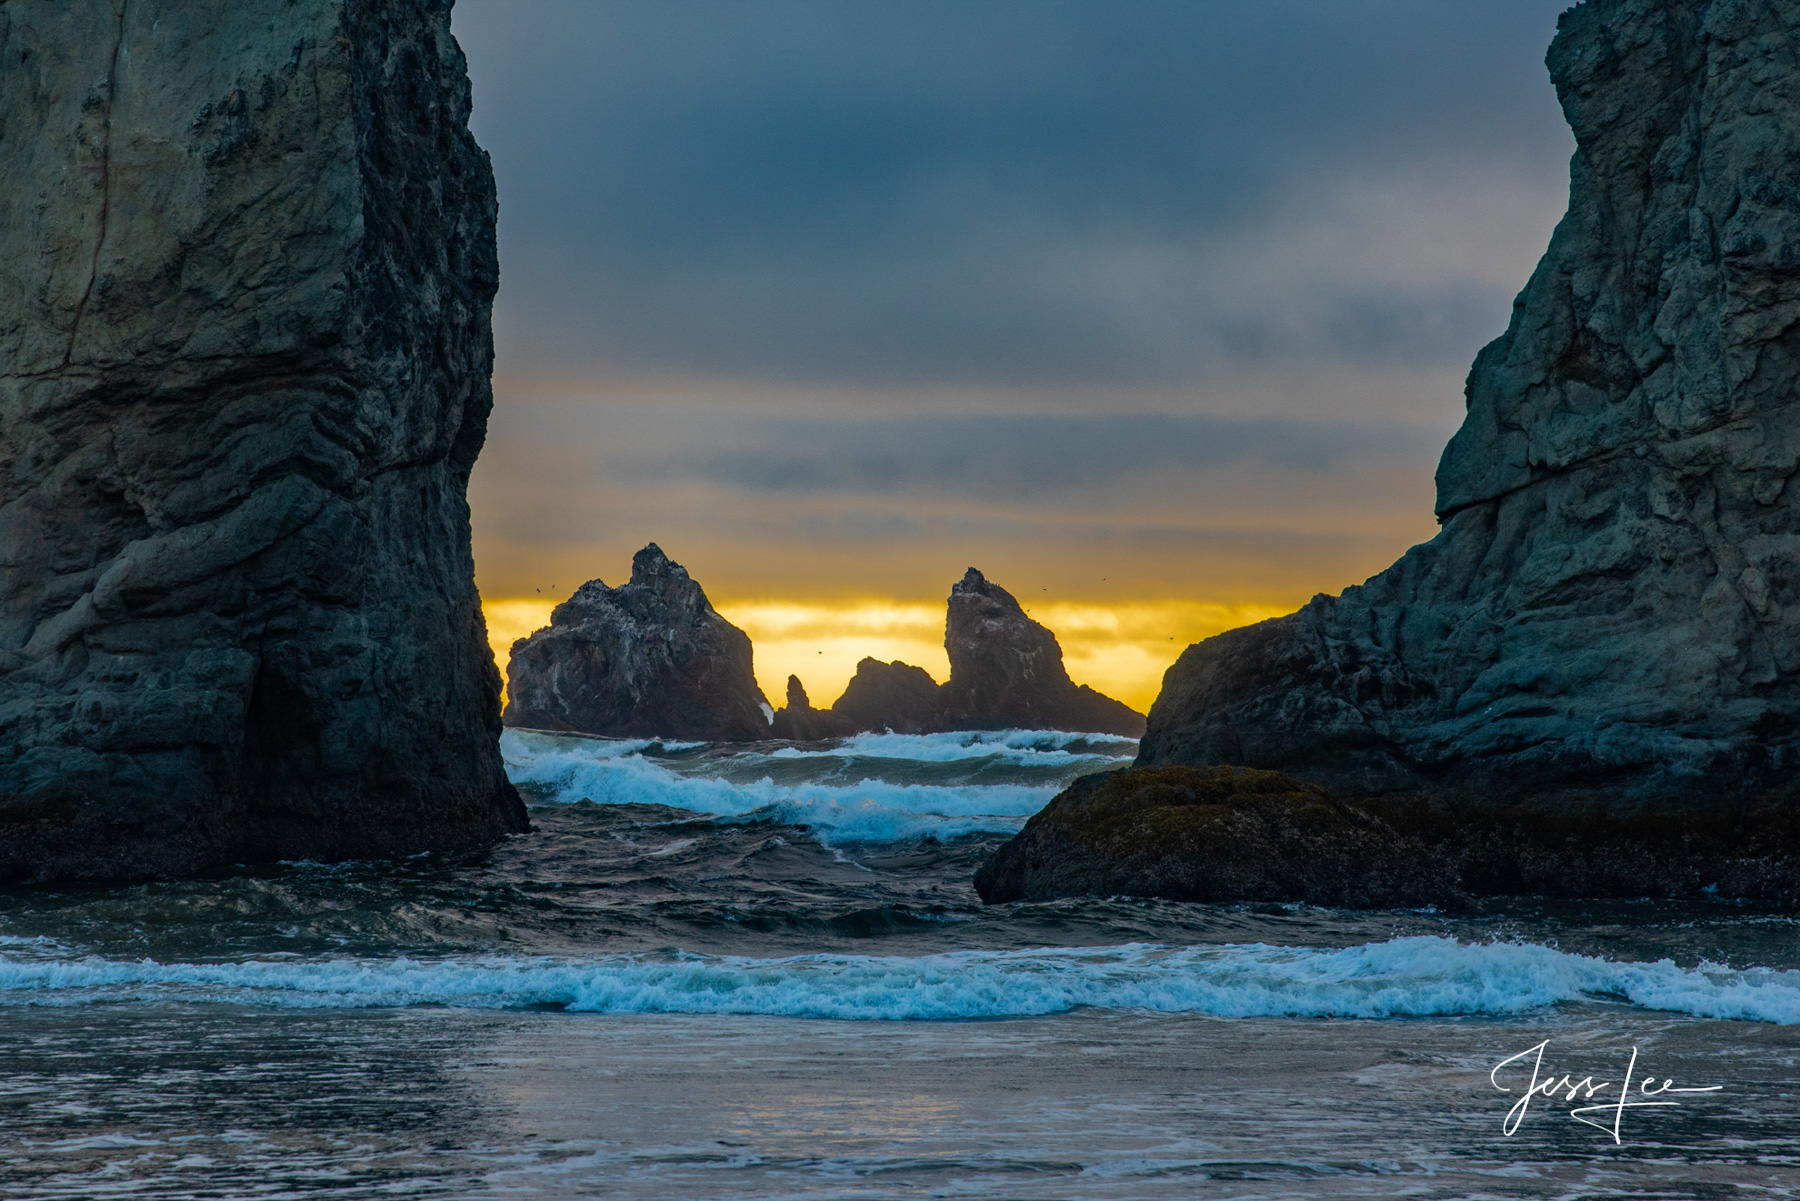 Sea Stacks | Gateway to the Pacific Limited Edition of 50  Exclusive high-resolution Museum Quality Fine Art Prints available...